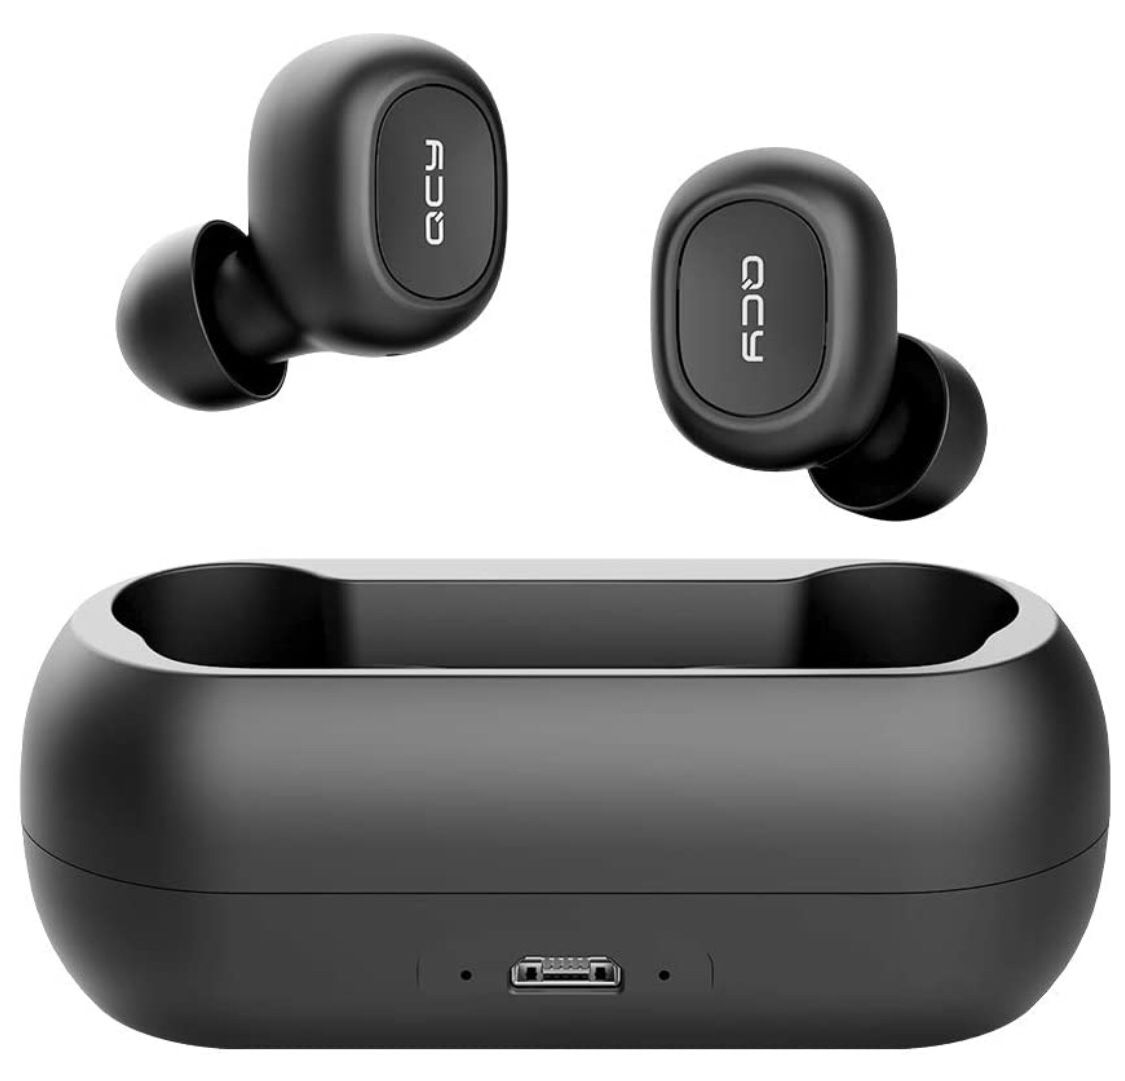 Wireless Earbuds TWS 5.0 Bluetooth Headphones with Microphone, Compatible for iPhone, Android and Other Leading Smartphones, Black